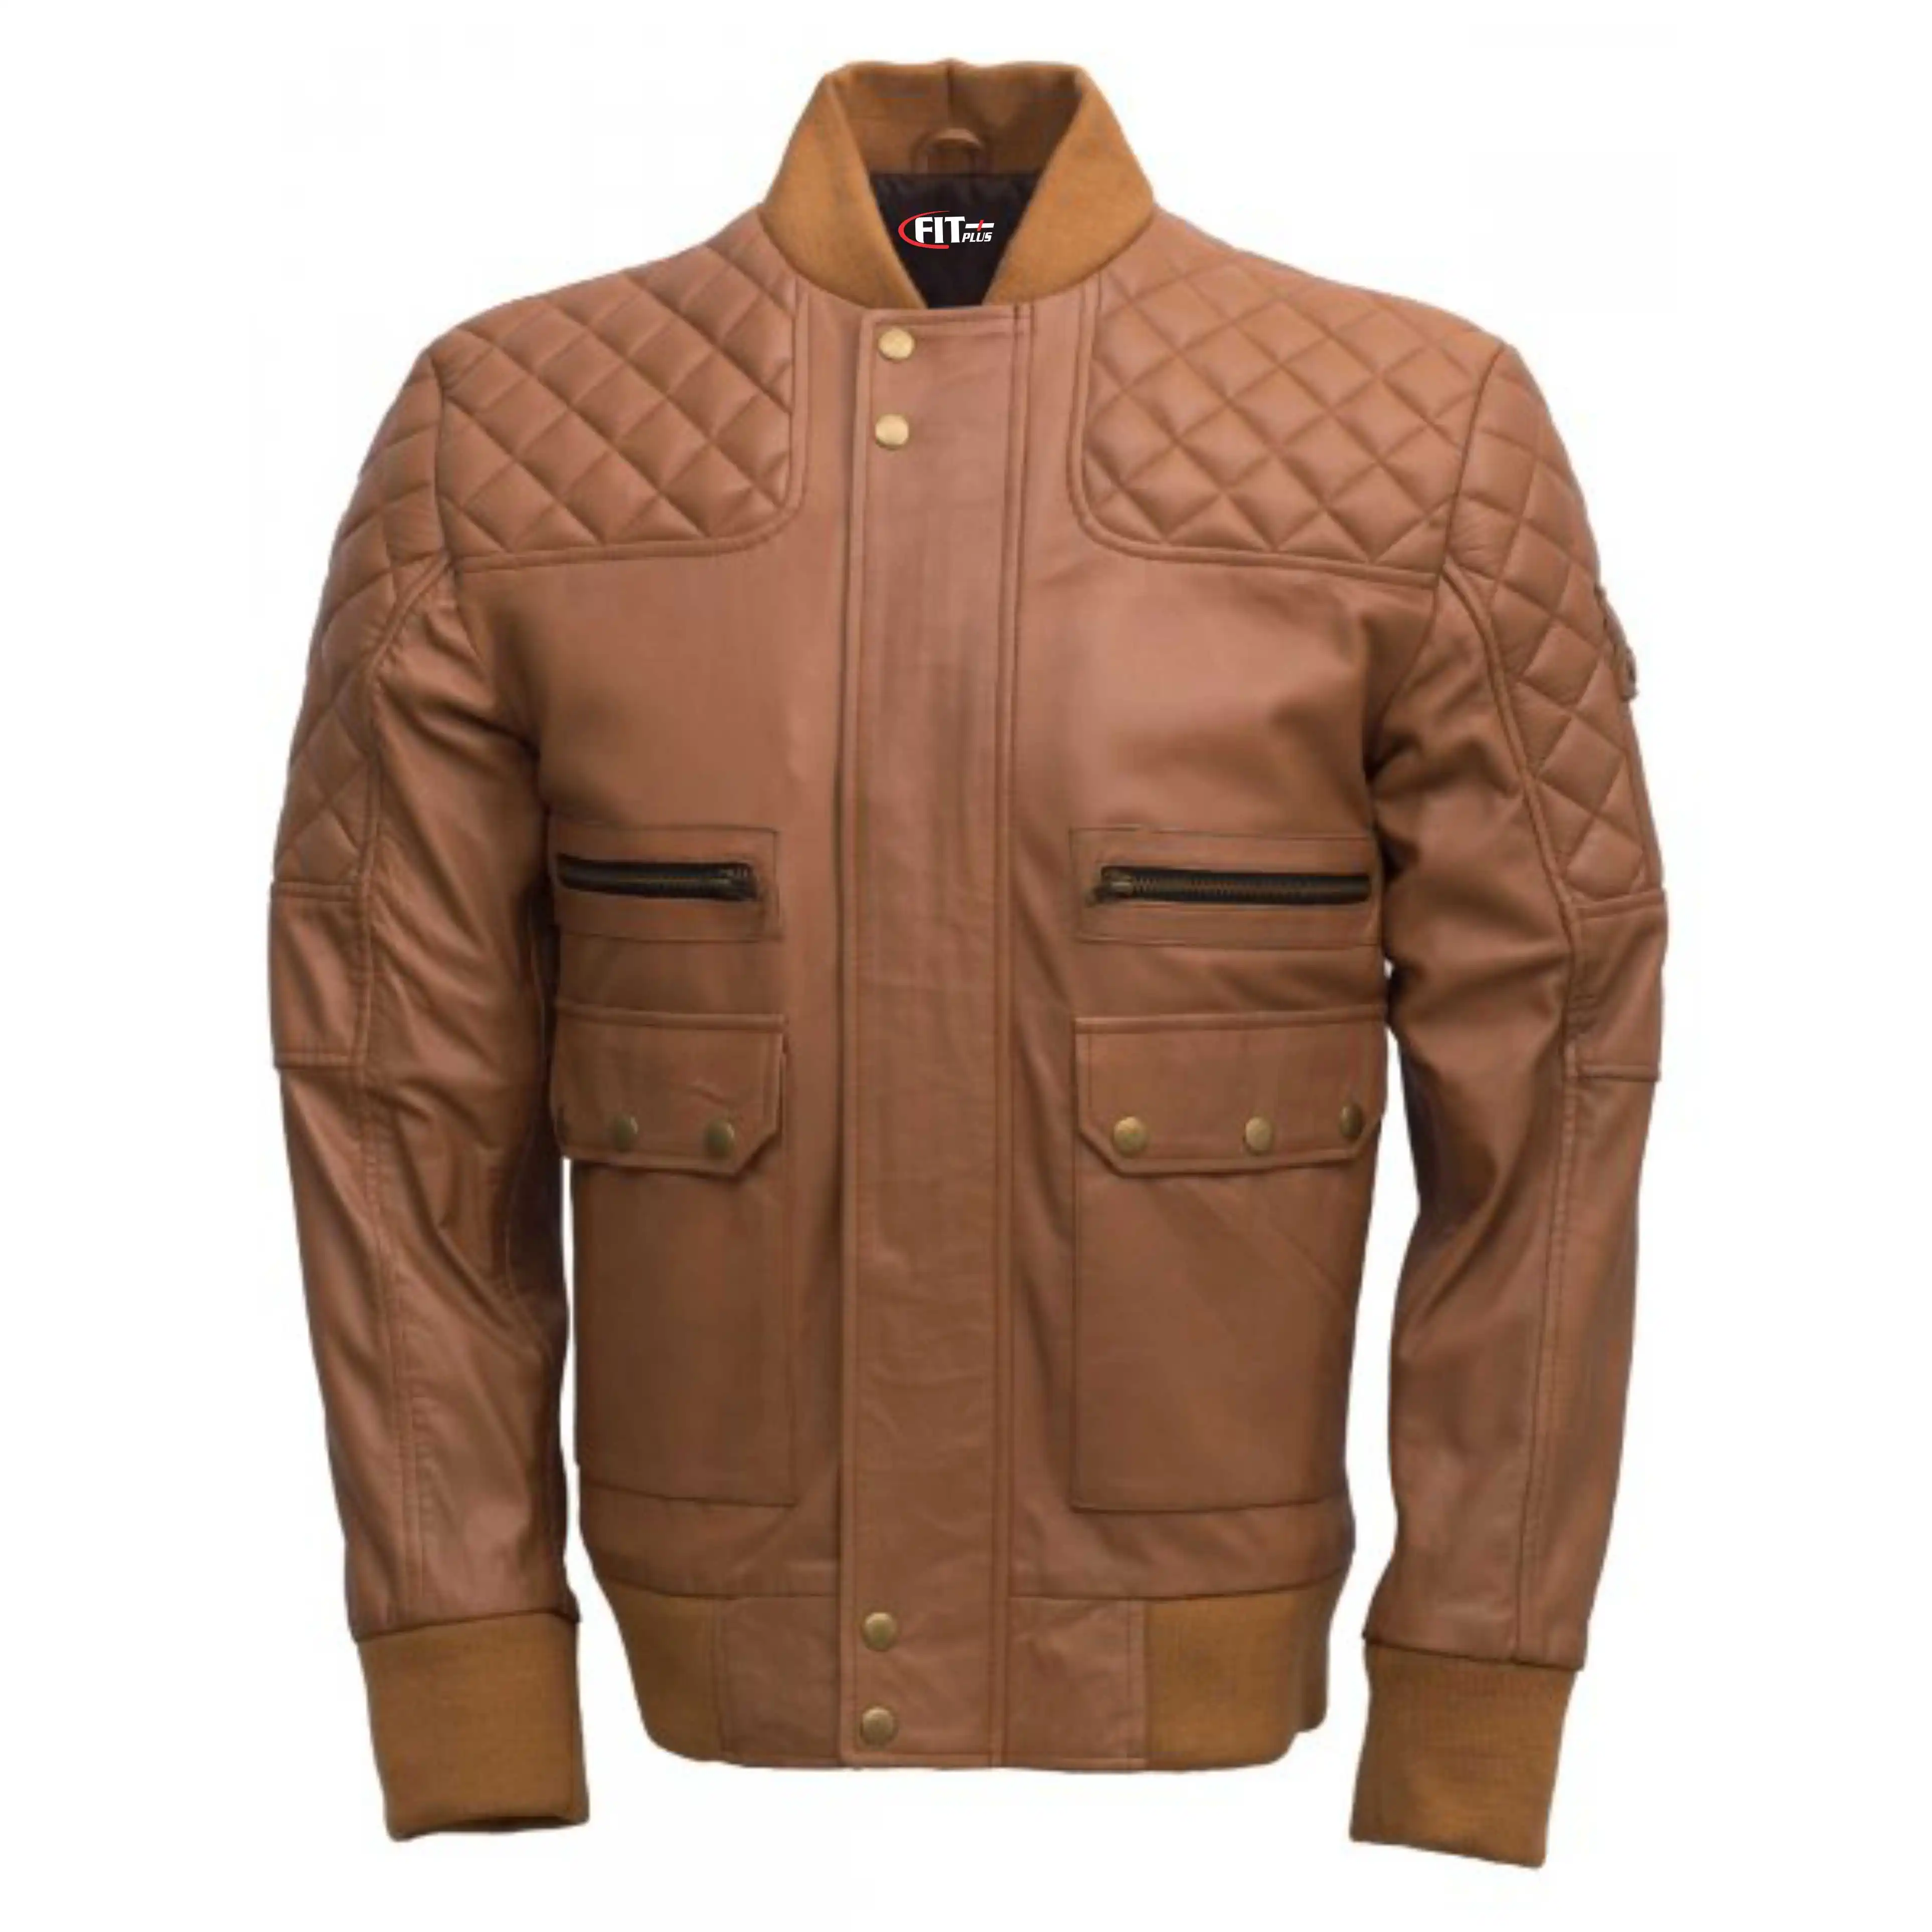 expensive leather jacket mens